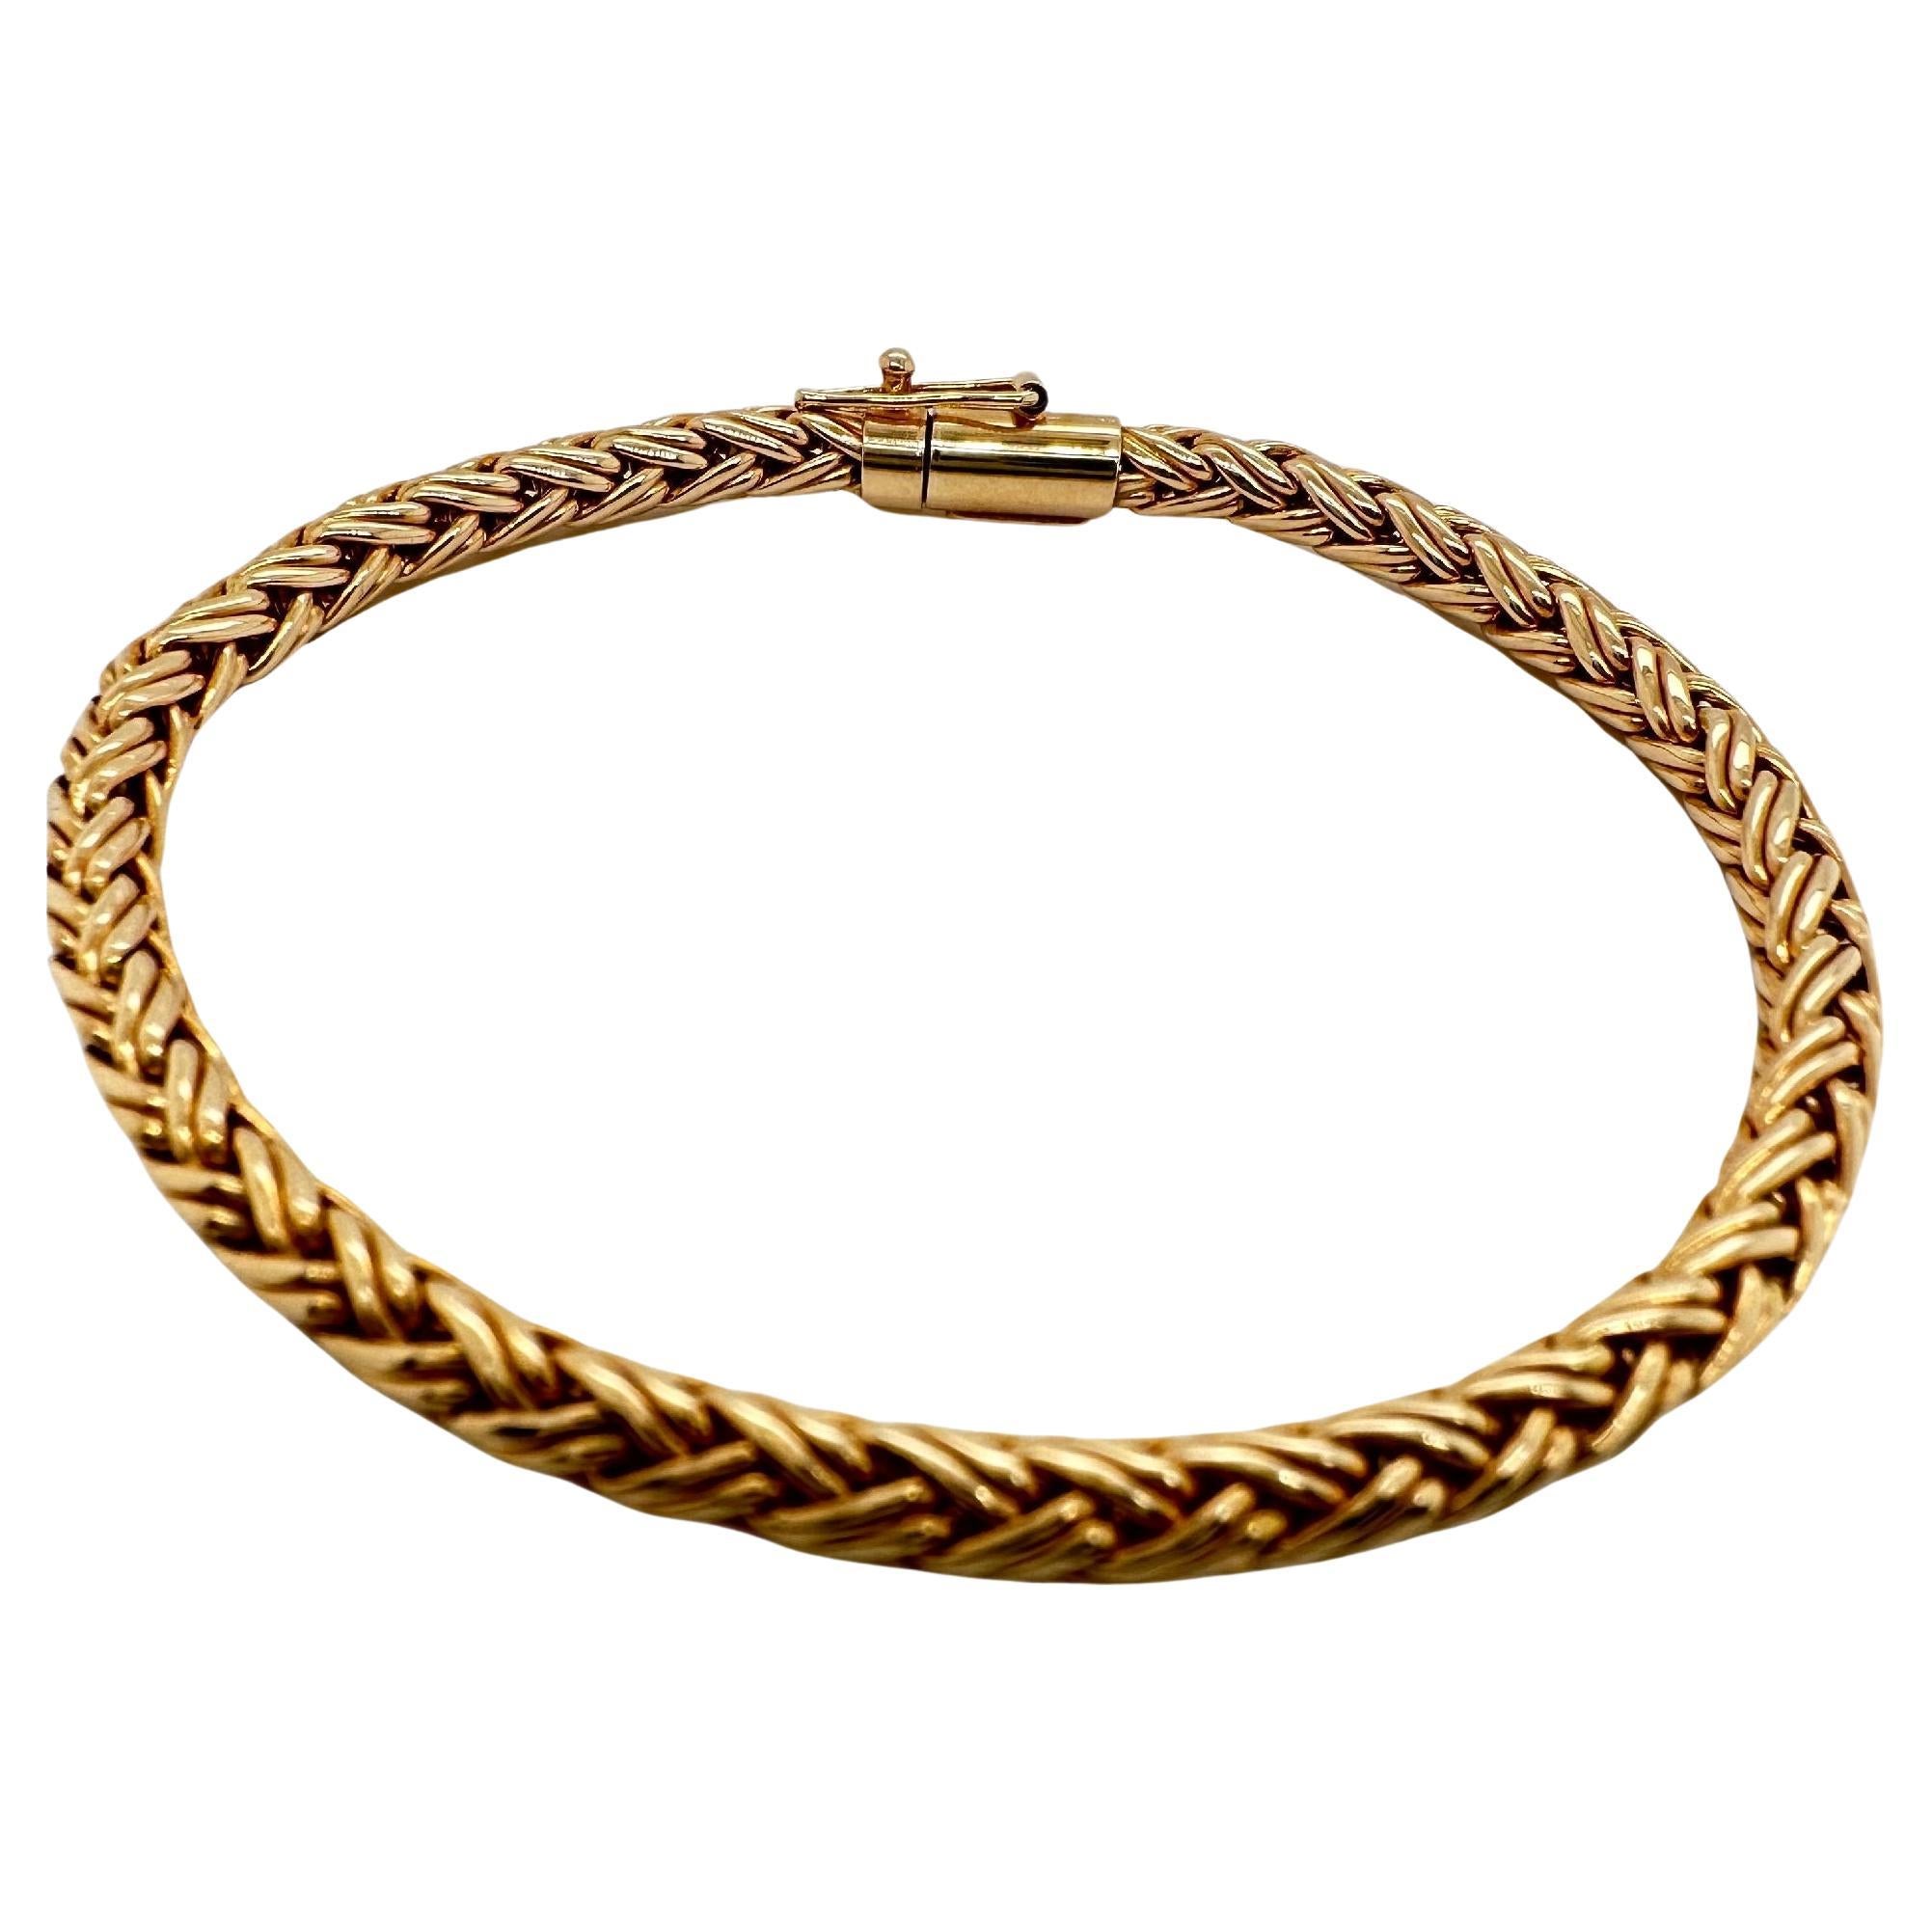 Tiffany & Co. Wheat Braided Rope Bracelet in 14k Yellow Gold For Sale